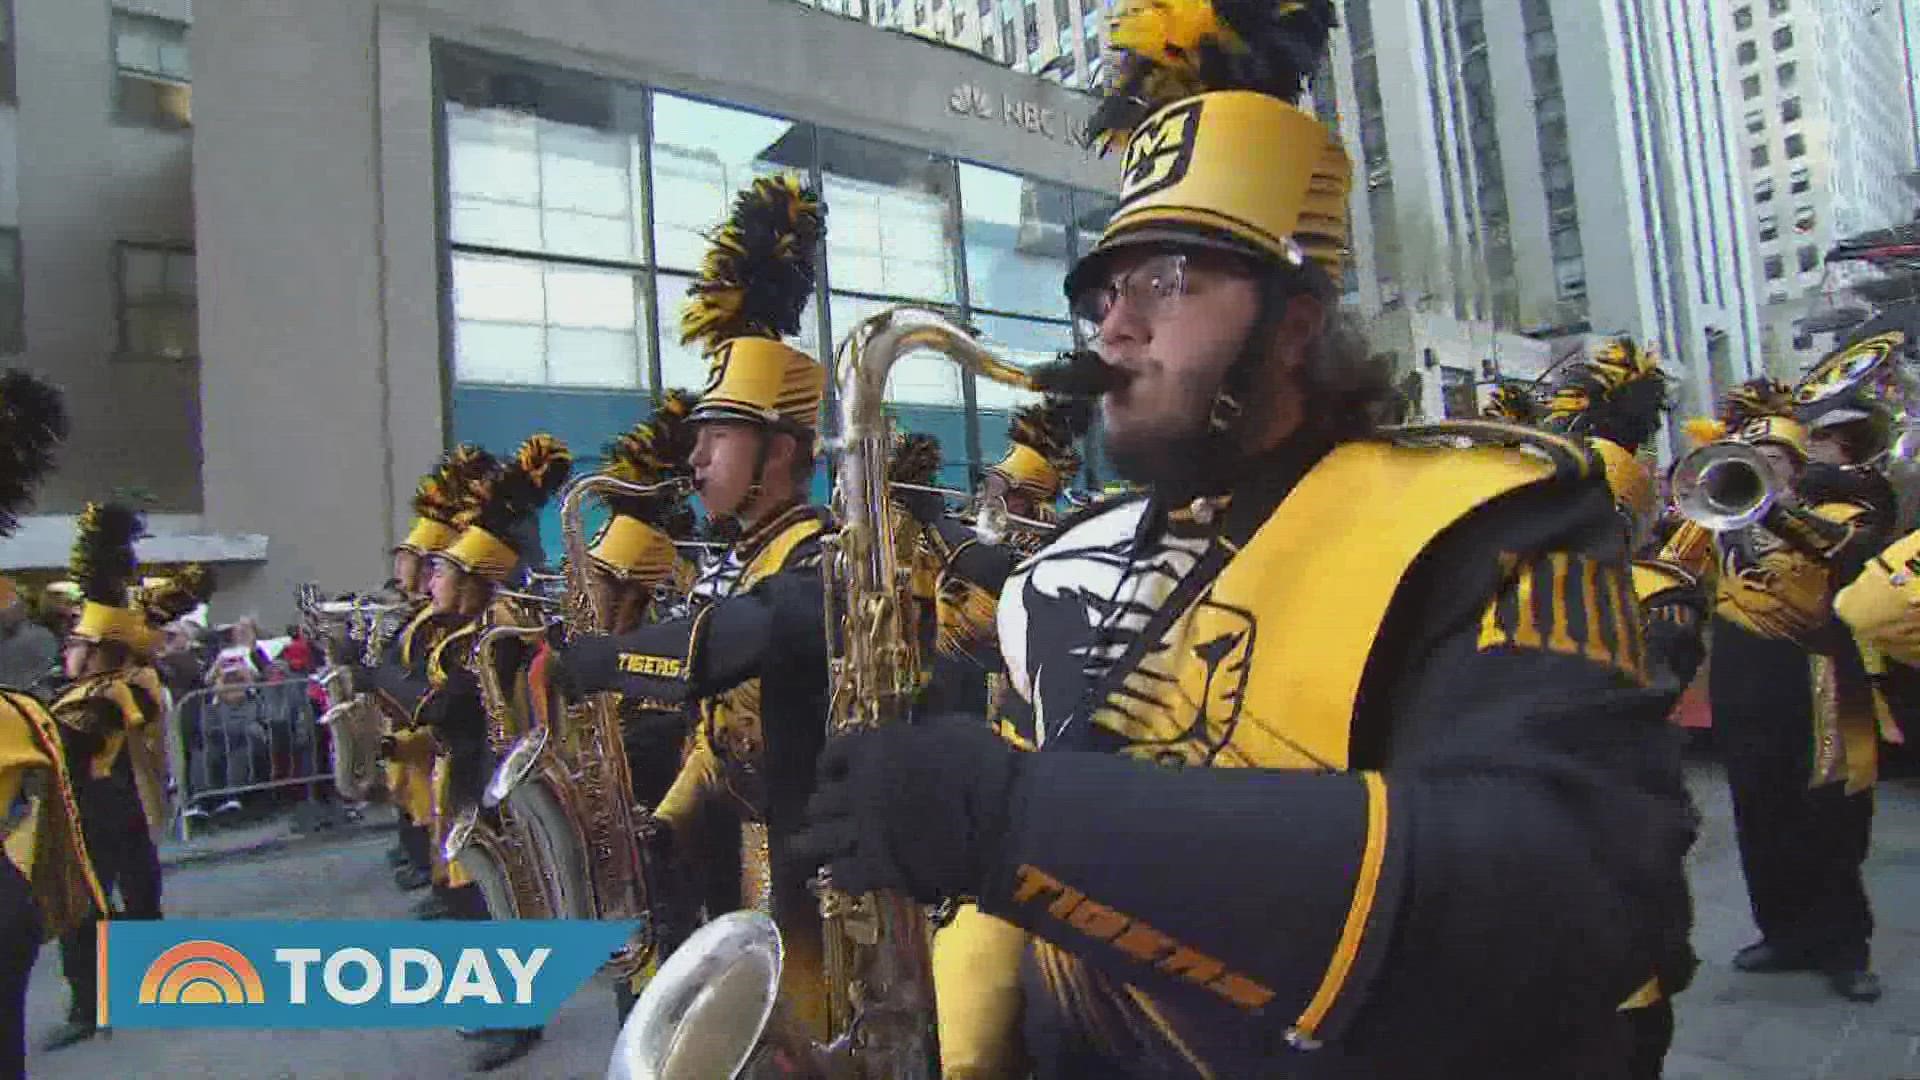 The TODAY Show featured the band all Wednesday morning. The Marching Mizzou then lead the parade.